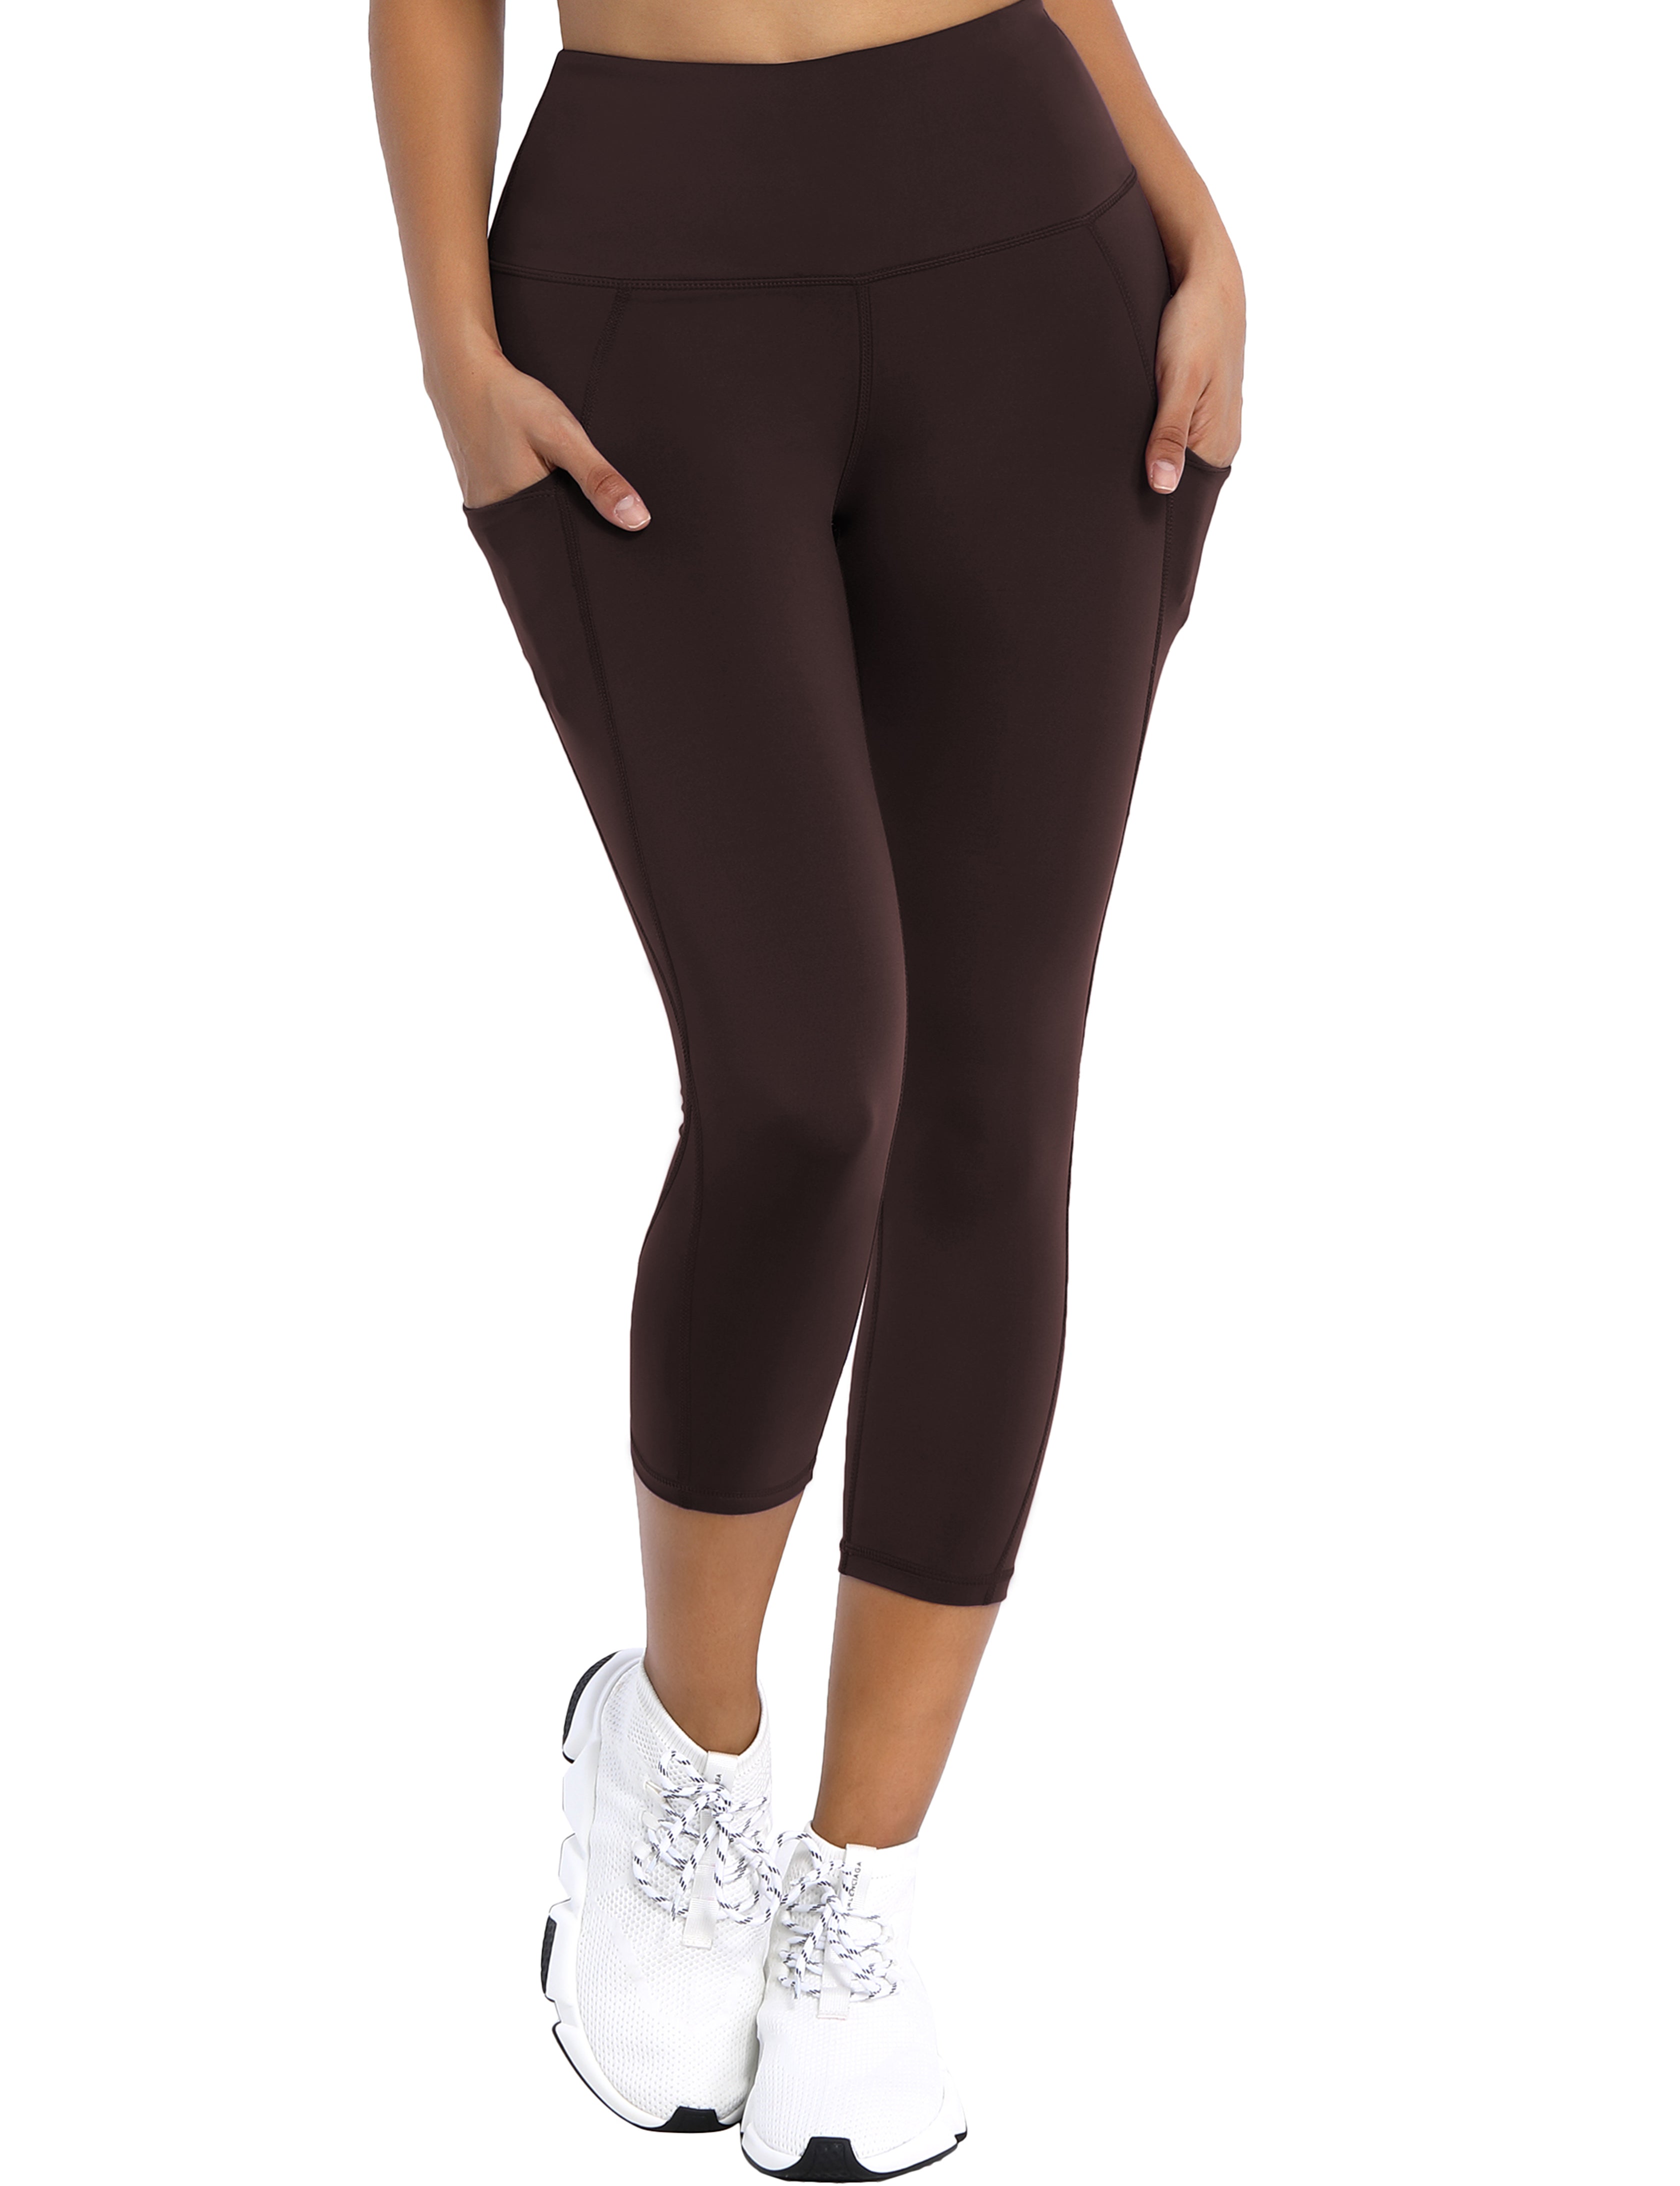 19" High Waist Side Pockets Capris mahoganymaroon 75%Nylon/25%Spandex Fabric doesn't attract lint easily 4-way stretch No see-through Moisture-wicking Tummy control Inner pocket